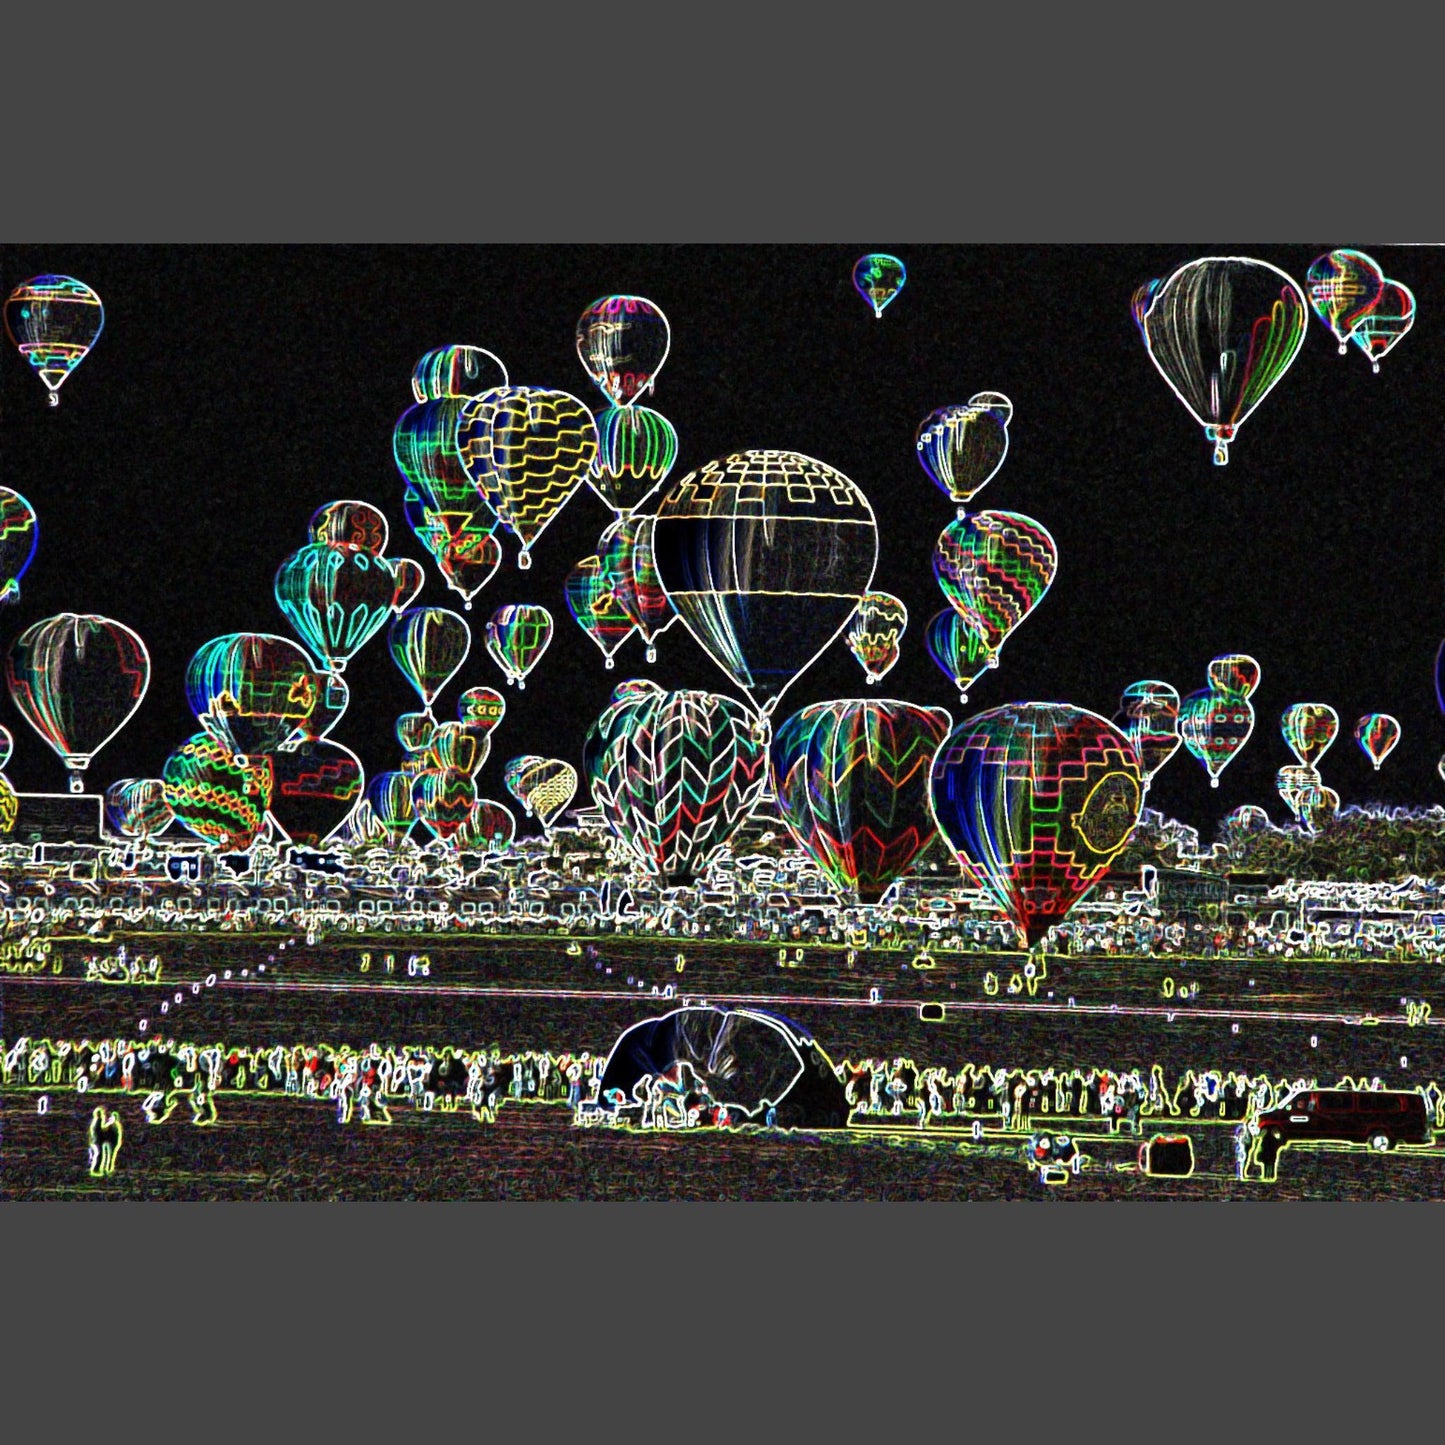 balloon-special-effect-2-v-isenhower-photography - V. Isenhower Photography